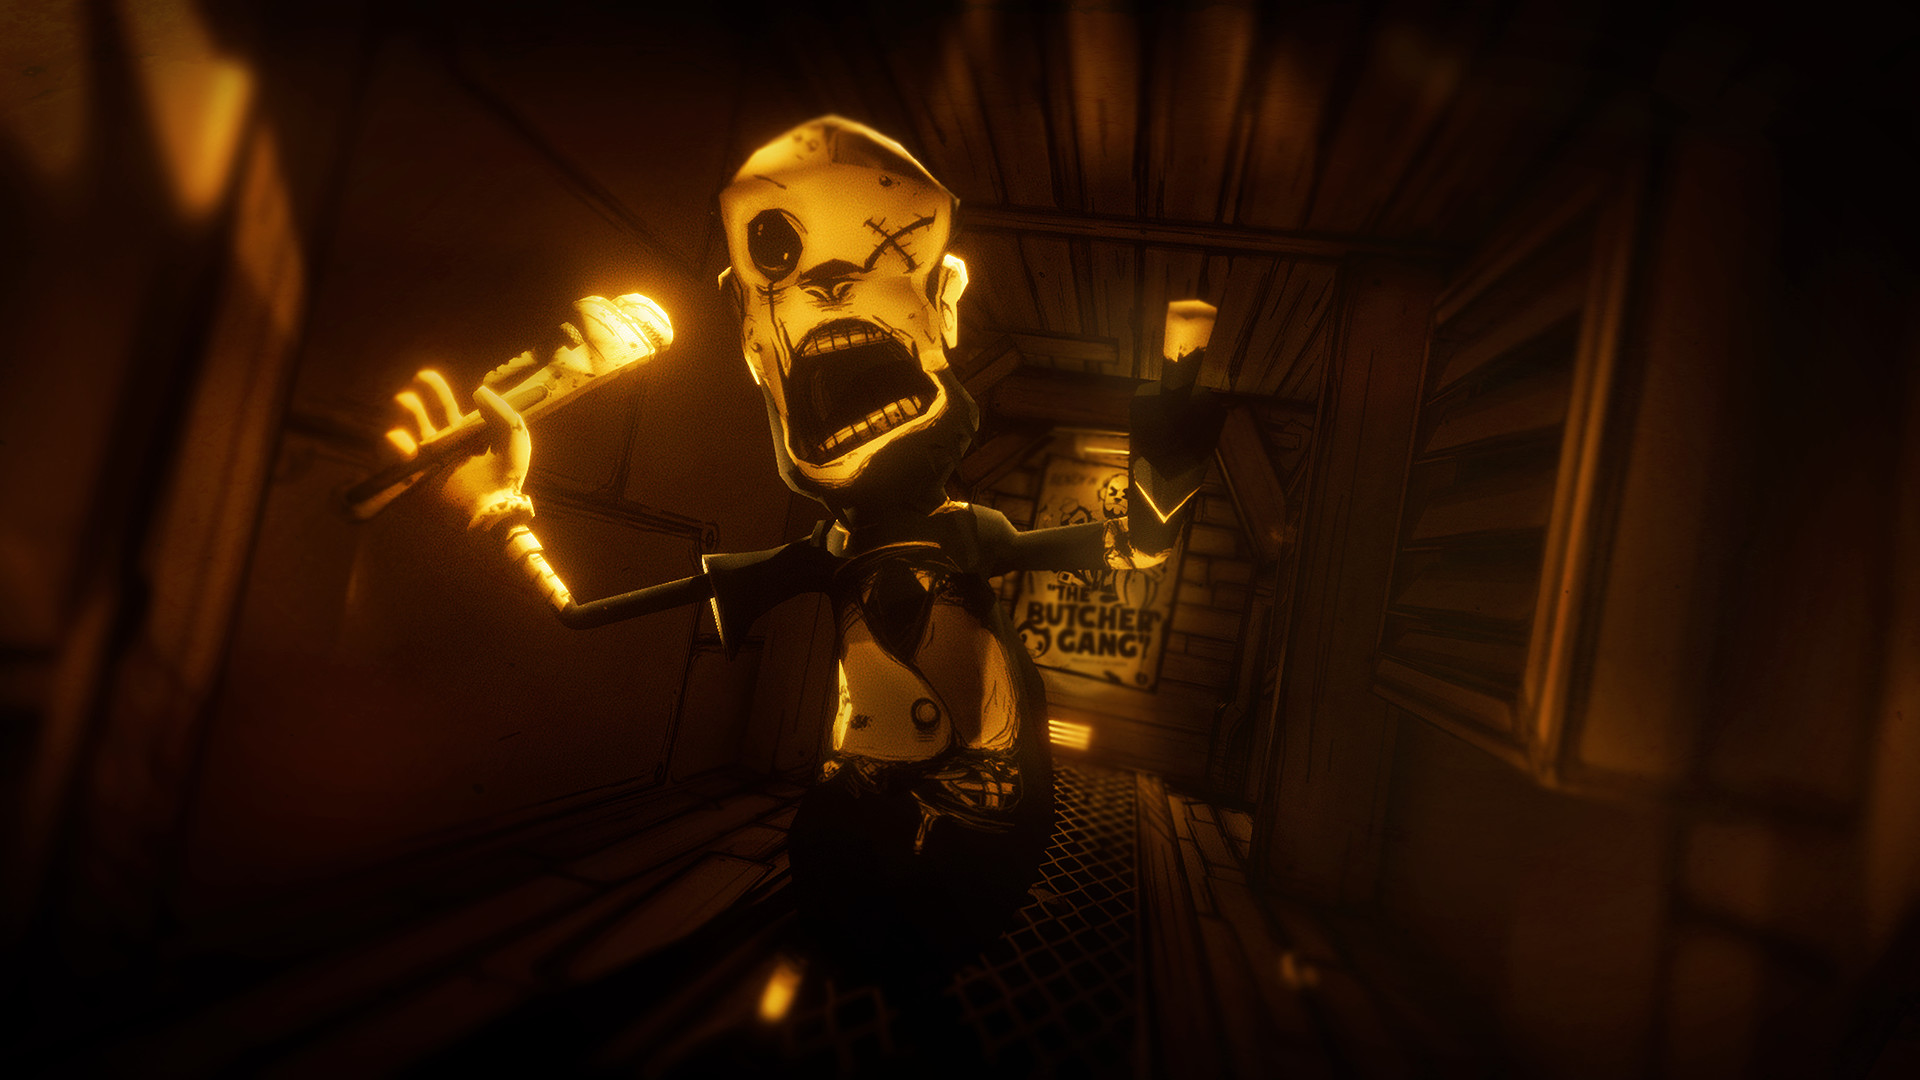 Игры бенди 2024. Bendy and the Ink Machine игра. Bendy and the Ink Machine Скриншоты. БЕНДИ из игры Bendy and the Ink Machine. БЕНДИ И чернильная машина ps4.